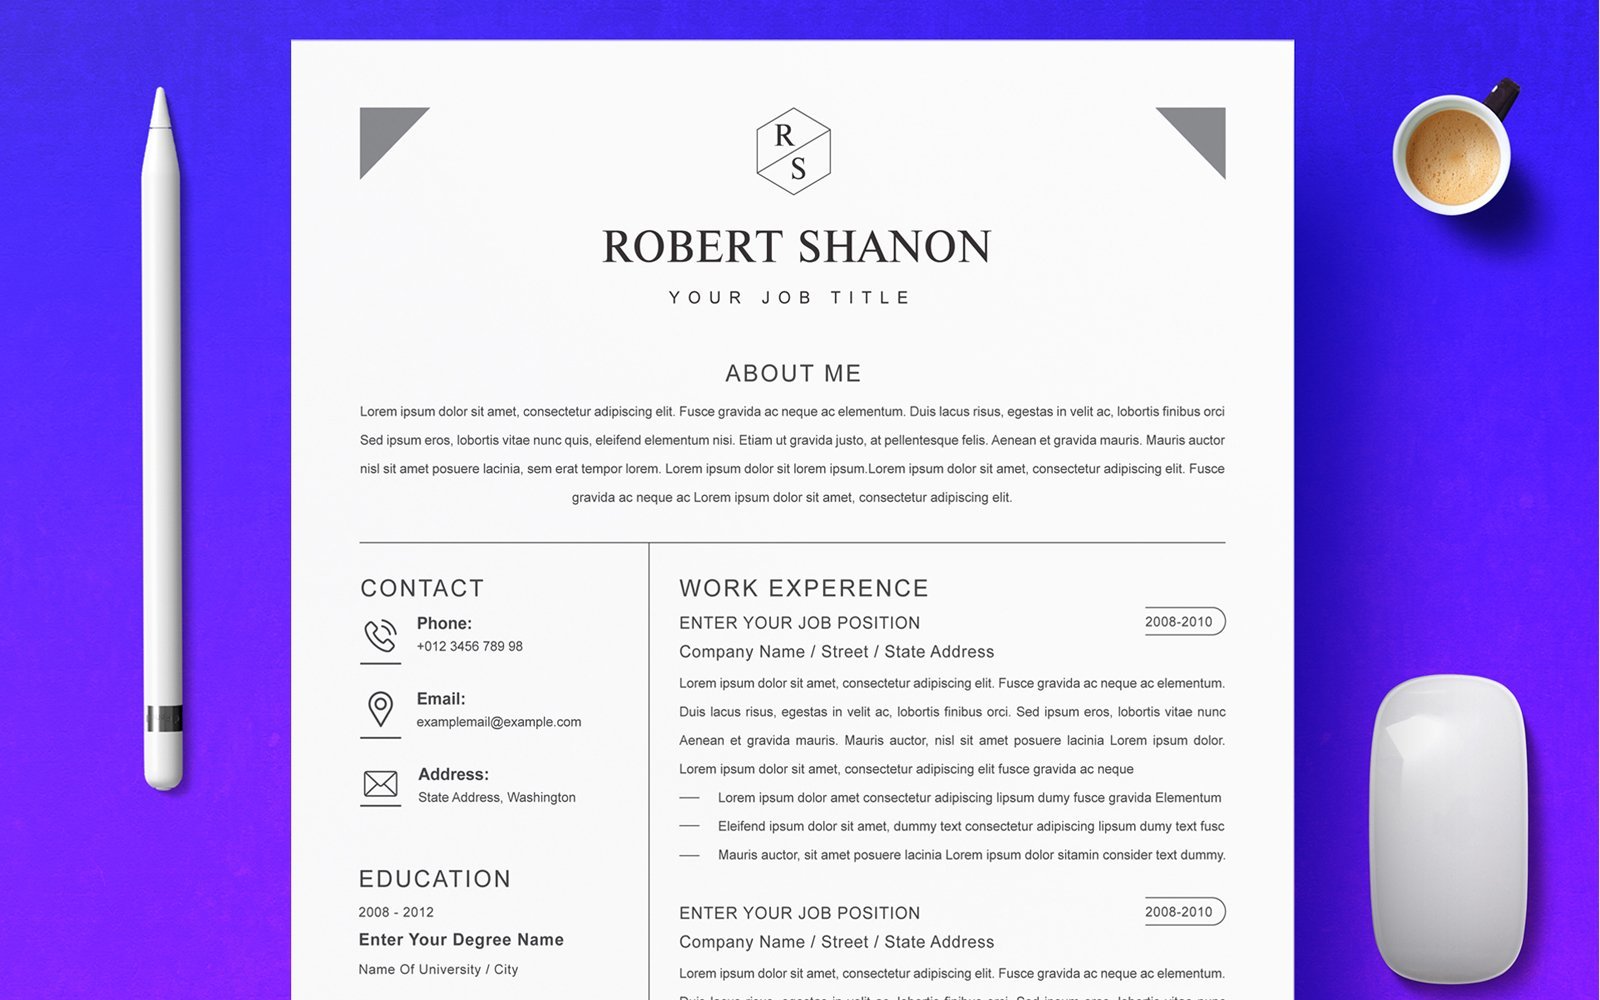 Template #216729 Resume Template Webdesign Template - Logo template Preview